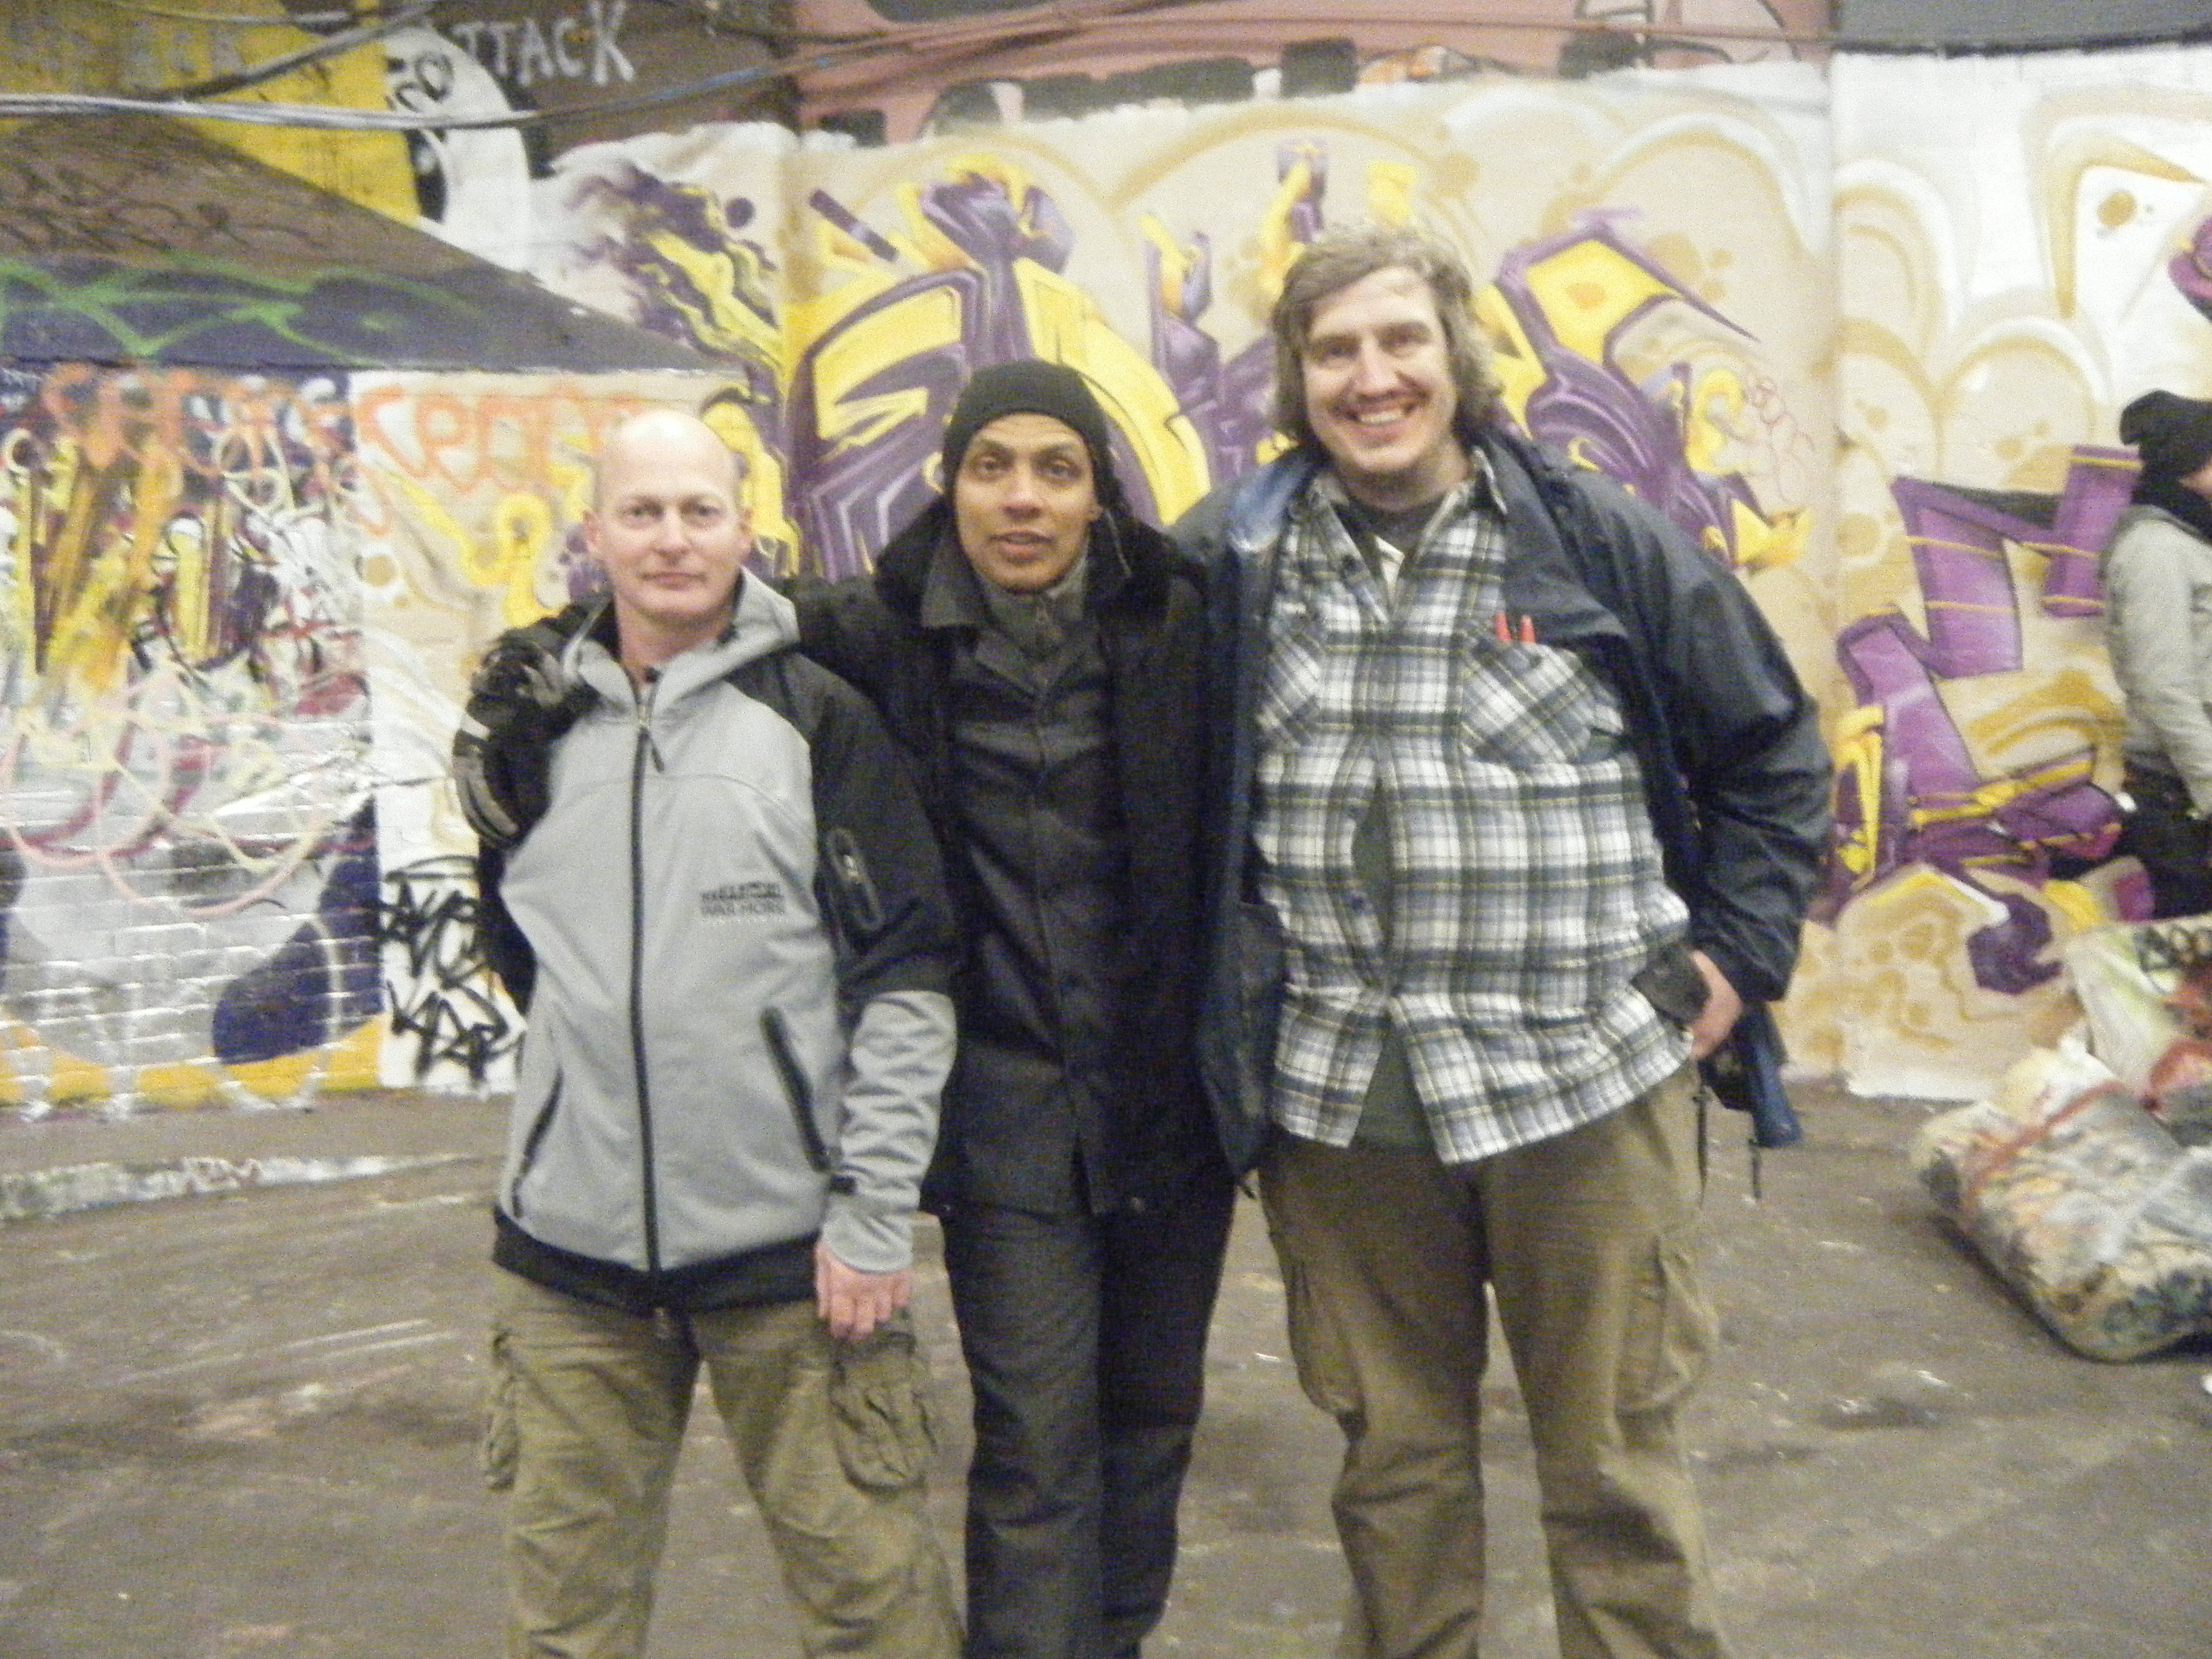 ADAM RICHARDS WITH CRAG JAMES AND GRAHAM WALKER AFTER FIGHT AND FIRE STUNTS A music group called Living in Hiding, which I directed the fight scenes for their new music video.